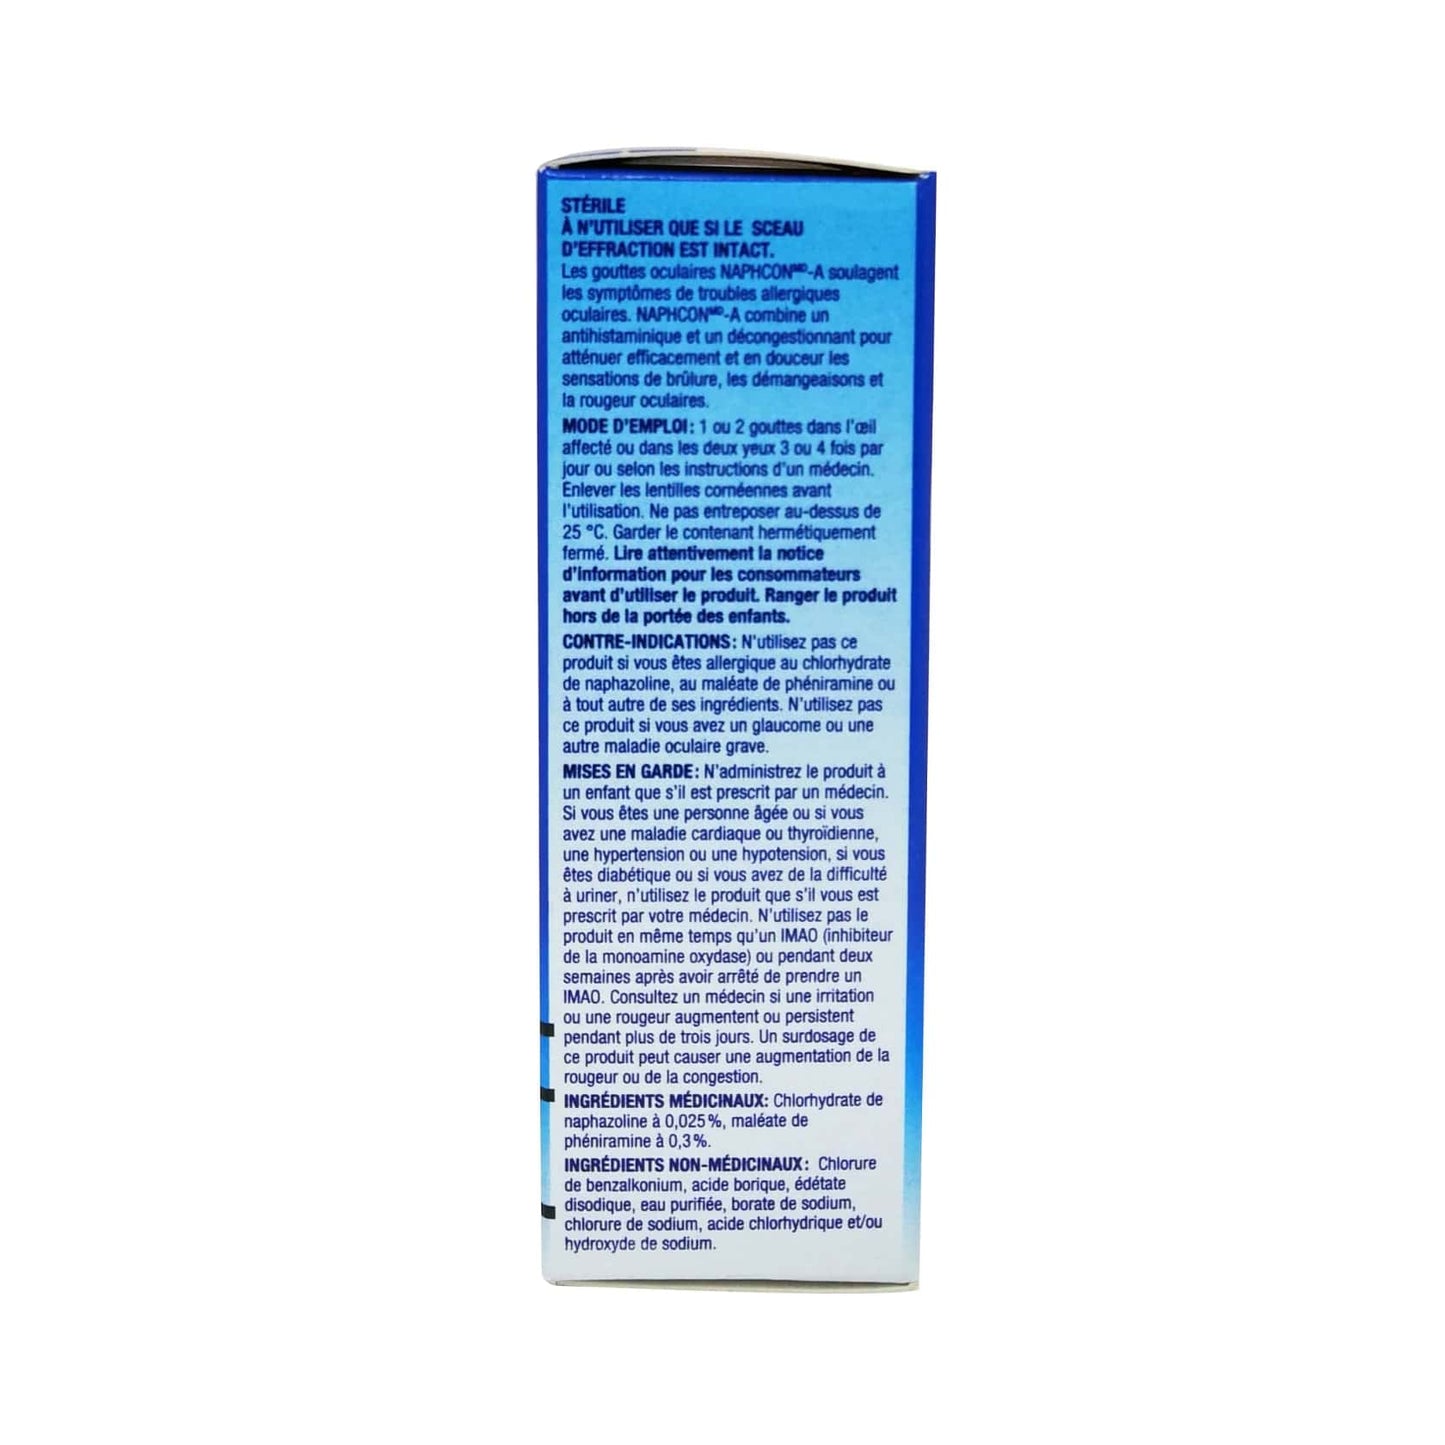 Product details, directions, ingredients, and warnings for Alcon Naphcon-A Allergy Relief Eye Drops in French